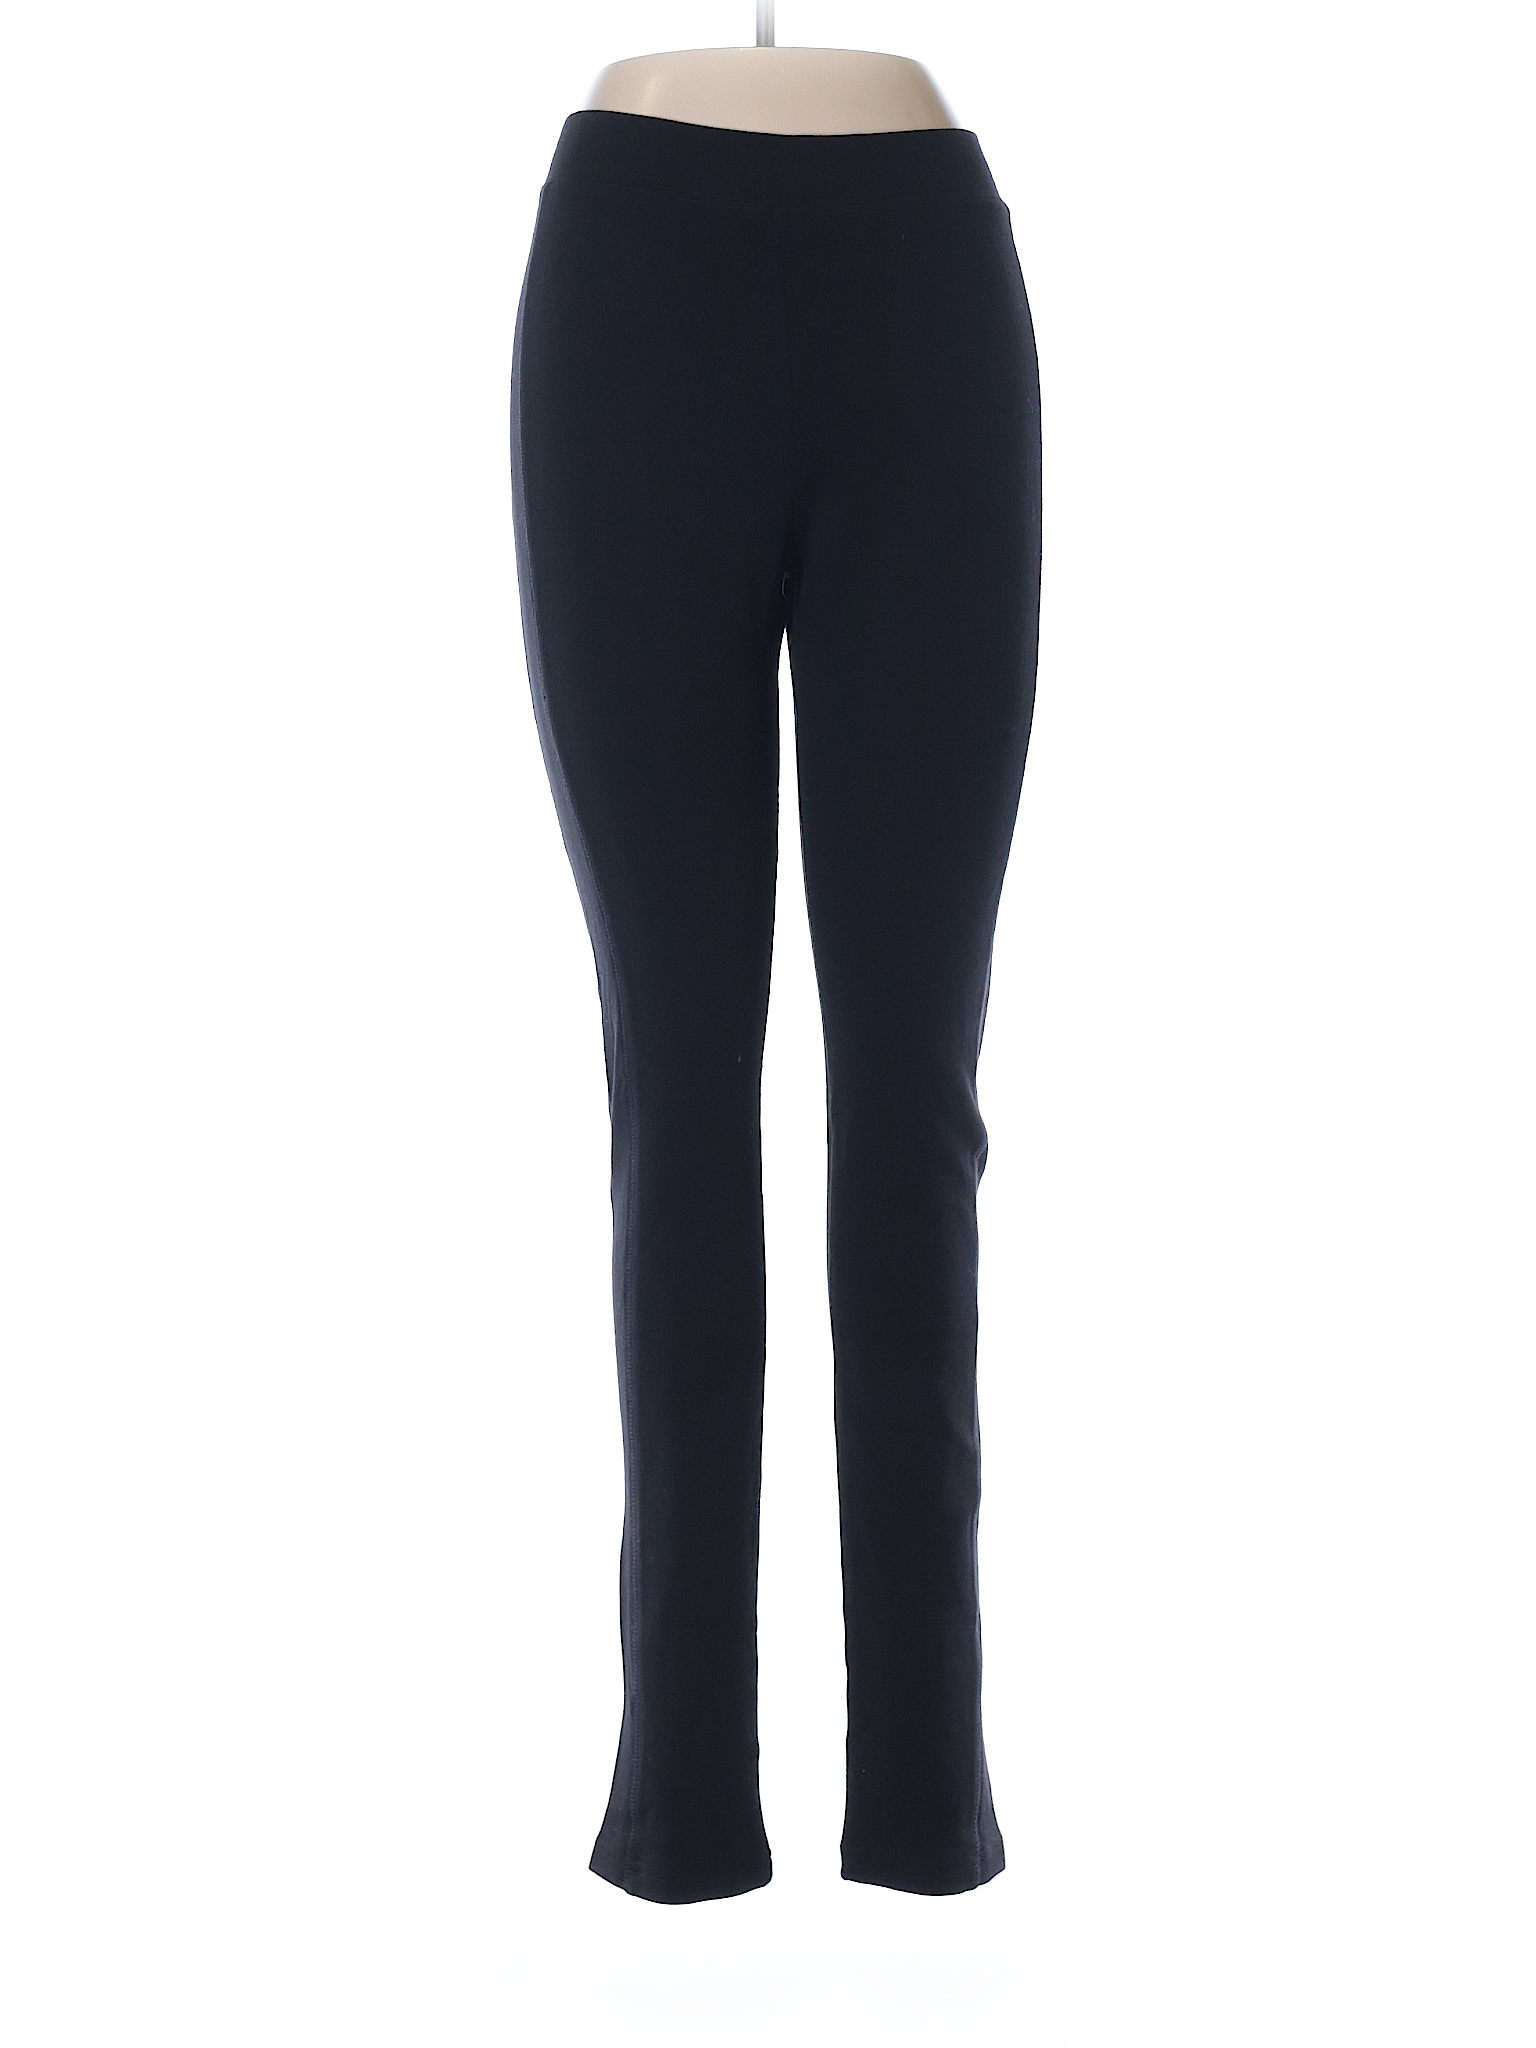 Divided by H&M Solid Black Leggings Size M - 38% off | thredUP